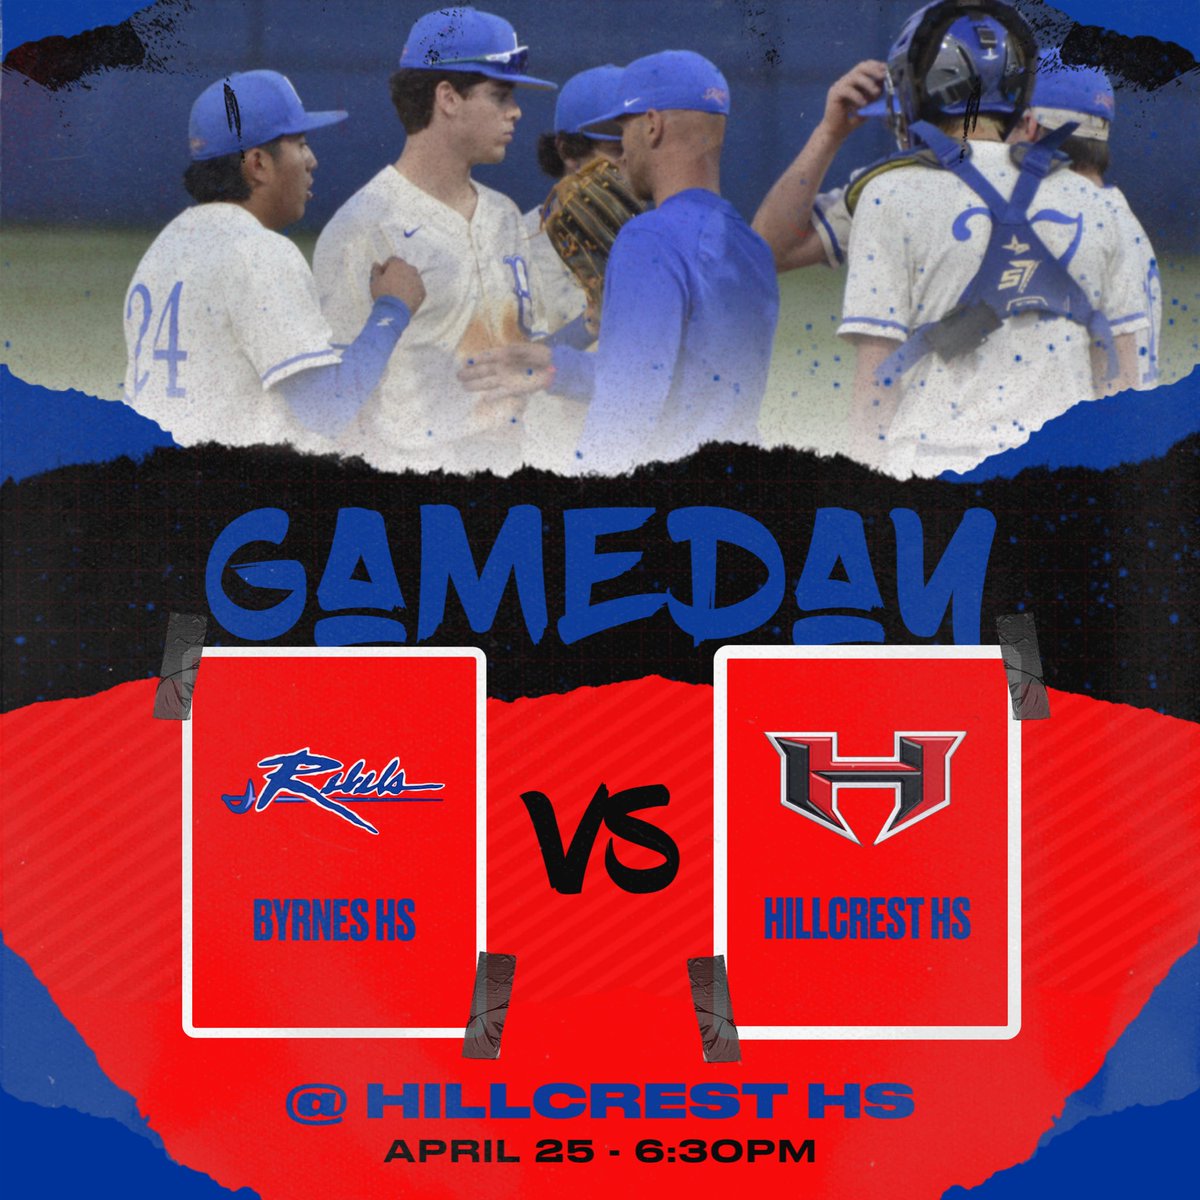 Gameday at Hillcrest! First pitch at 6:30!
#GoRebels